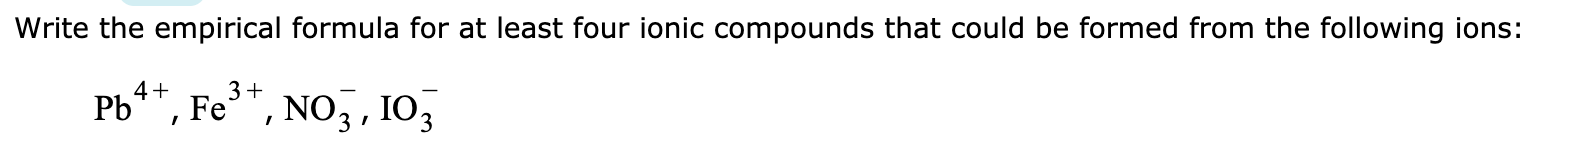 Write the empirical formula for at least four ionic compounds that could be formed from the following ions:
b4, Fe, Noj, 103
/
